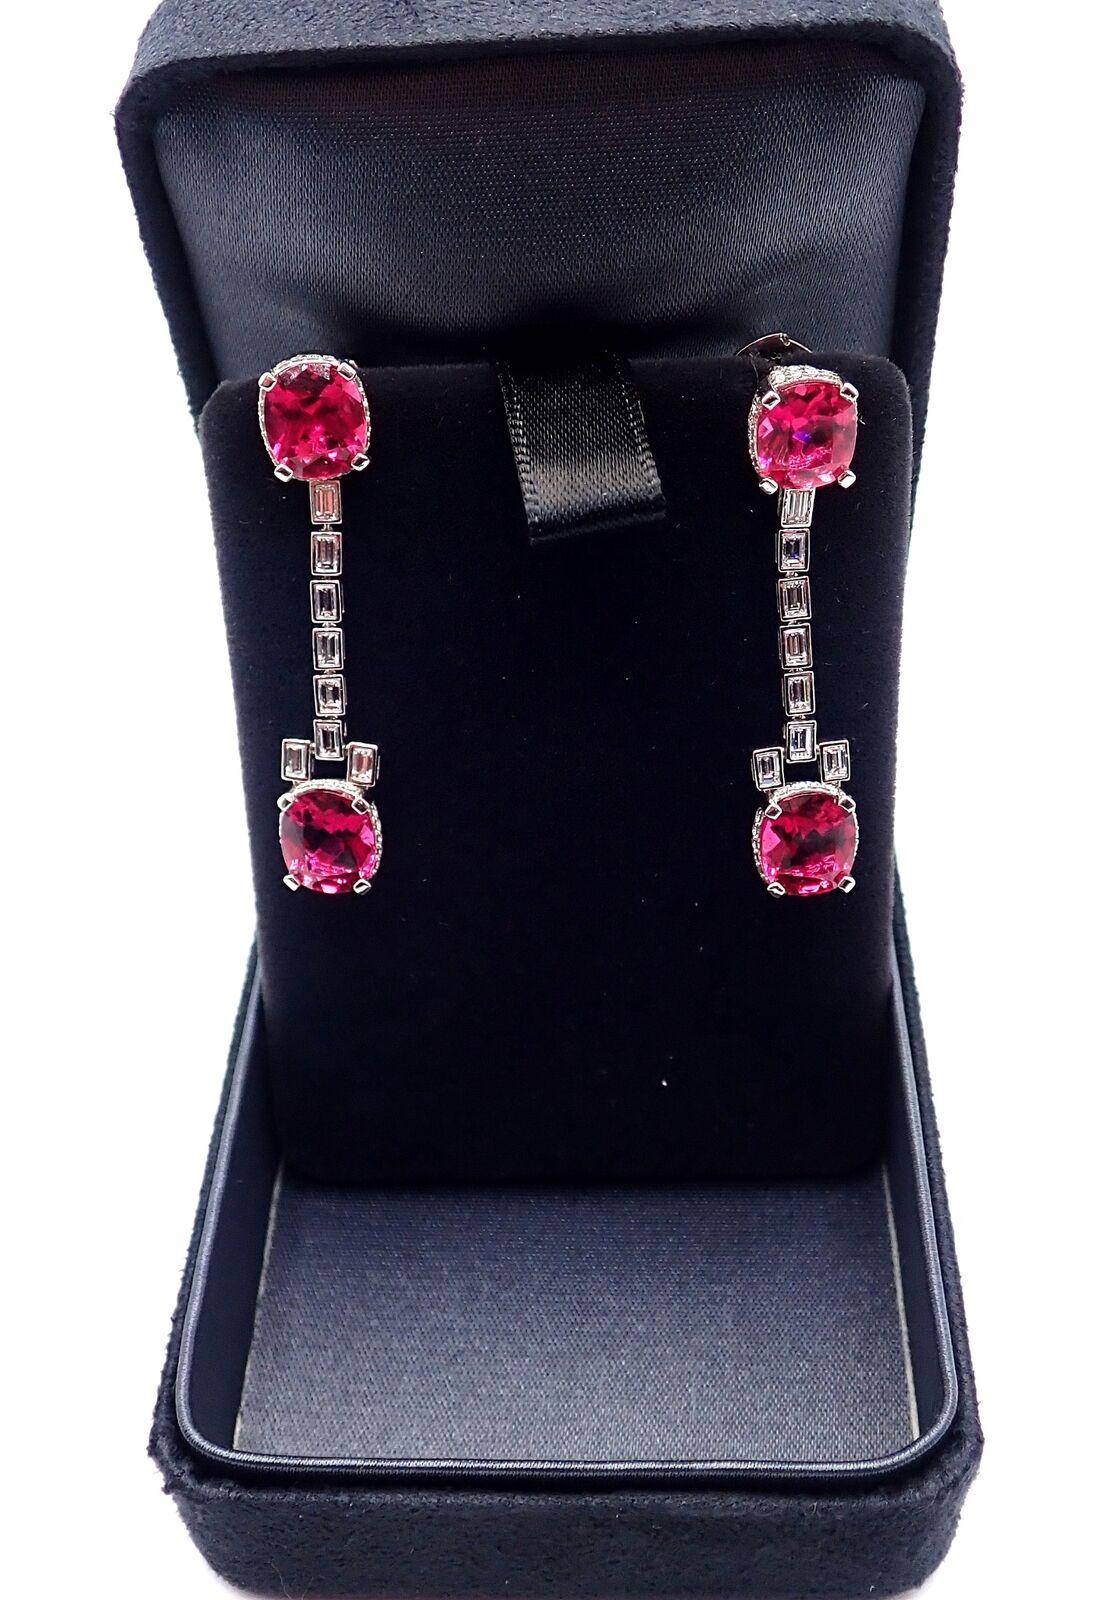 Platinum Diamond Rubellite Drop Earrings by Tiffany & Co. 
With 60 round brilliant cut diamonds - VS1 clarity, E color total weight approximately .36ct
16 emerald cut diamonds VS1 clarity E color total weight approximately .96ct
4 oval cut rubellite